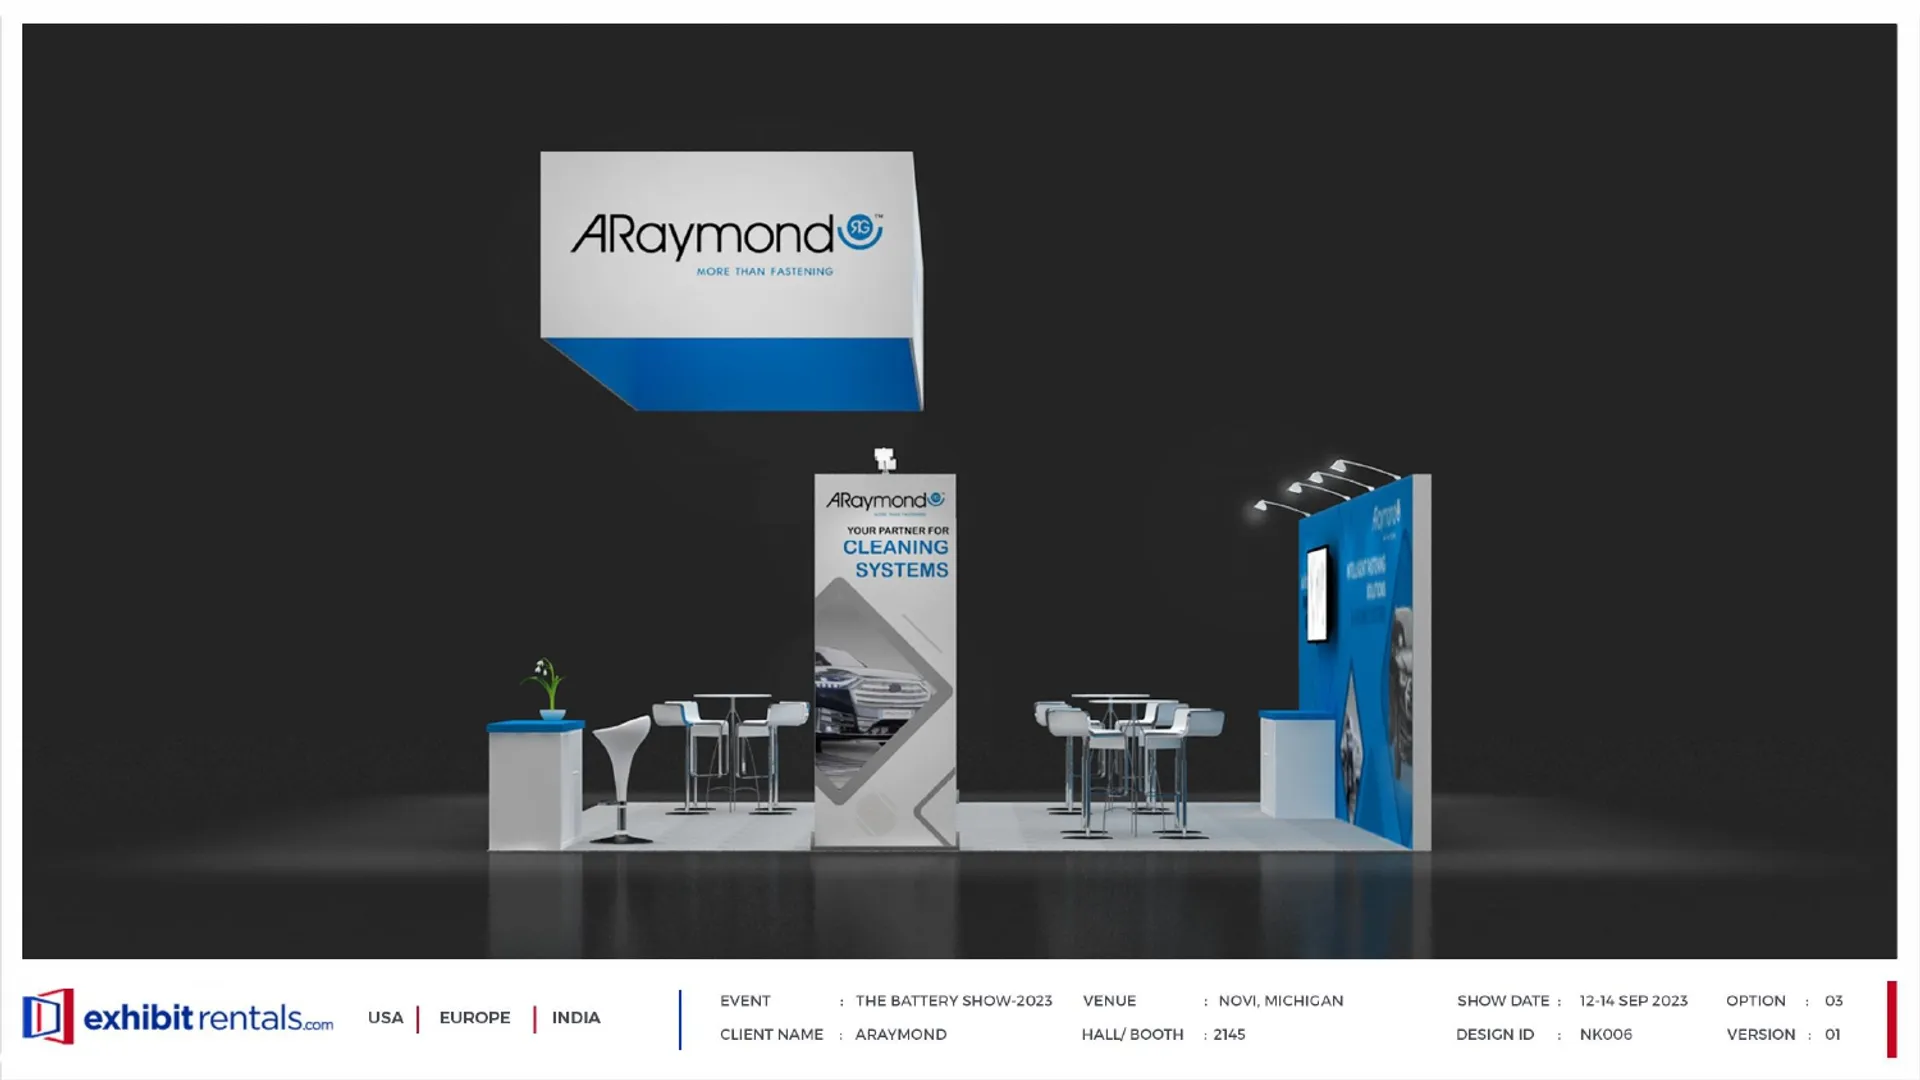 booth-design-projects/Exhibit-Rentals/2024-04-18-20x20-PENINSULA-Project-88/3.1_ARaymond_The Battery Show_ER Design presentation-15_page-0001-b6xovh.jpg